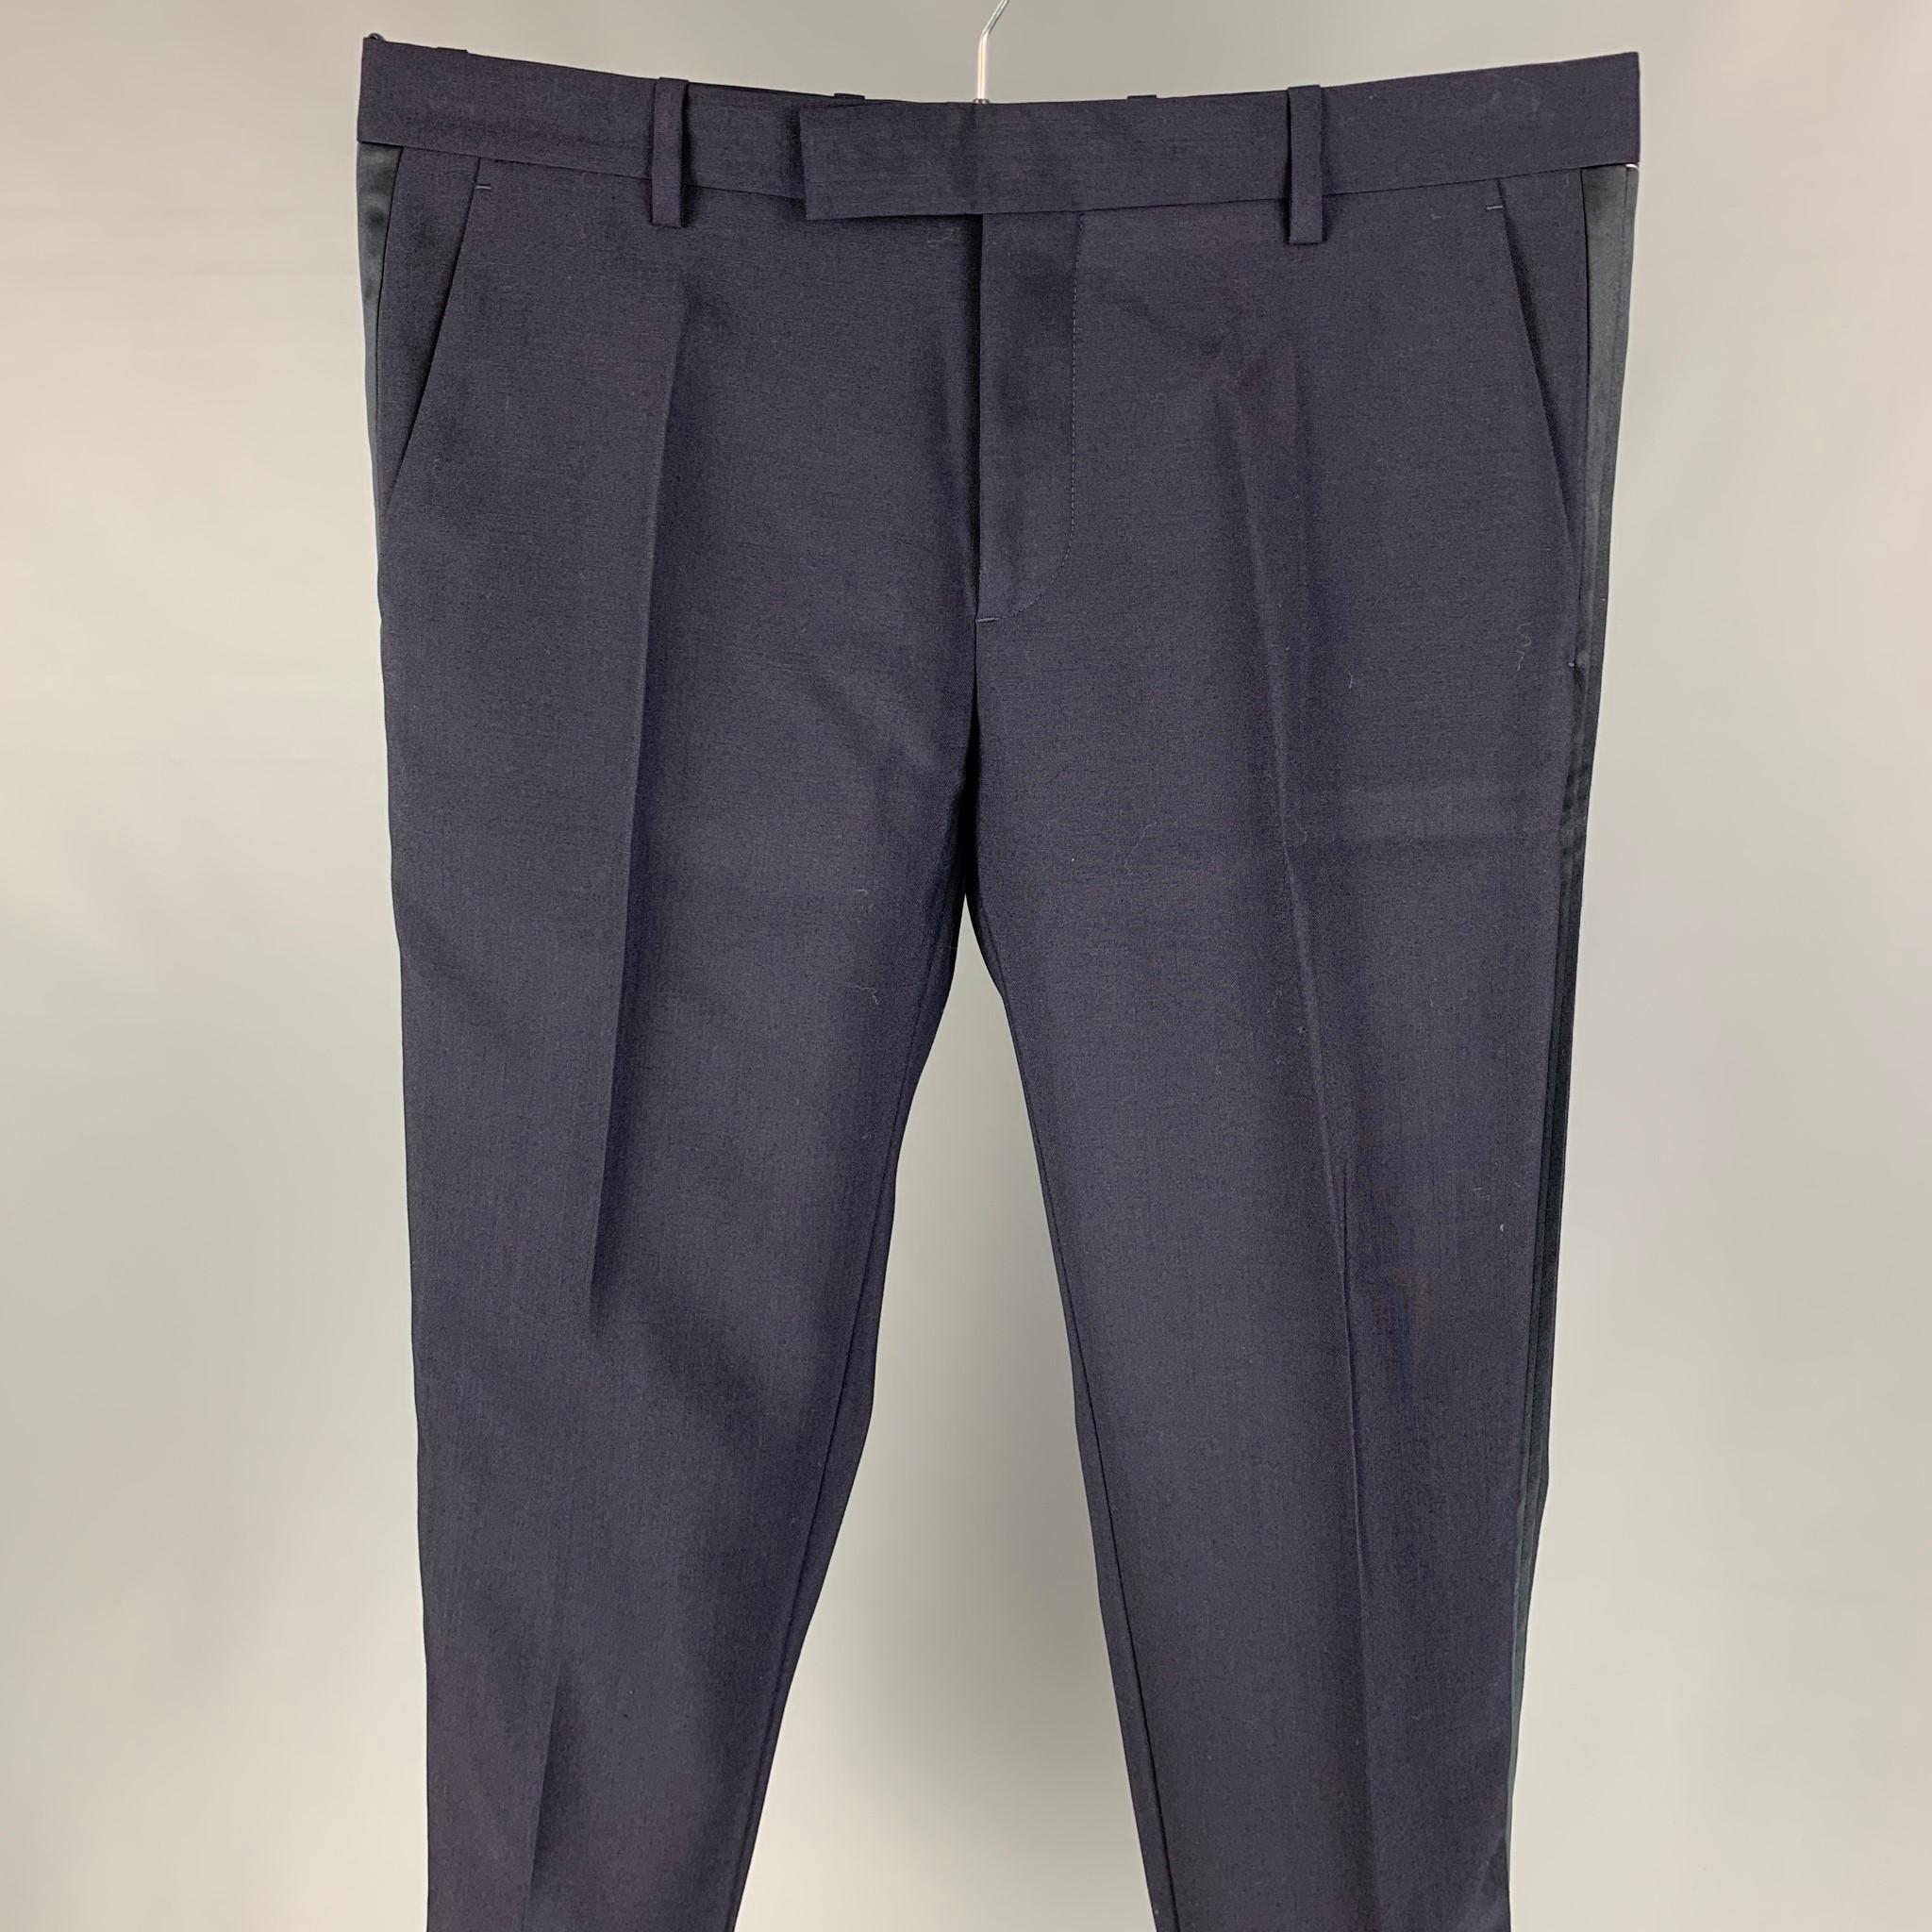 
VIKTOR & ROLF tuxedo dress pants comes in a navy & black mohair featuring a slim fit, front tab, and a zip ly closure. Made in Italy. 

Excellent Pre-Owned Condition.
Marked: 50

Measurements:

Waist: 34 in.
Rise: 9.5 in.
Inseam: 33 in. 